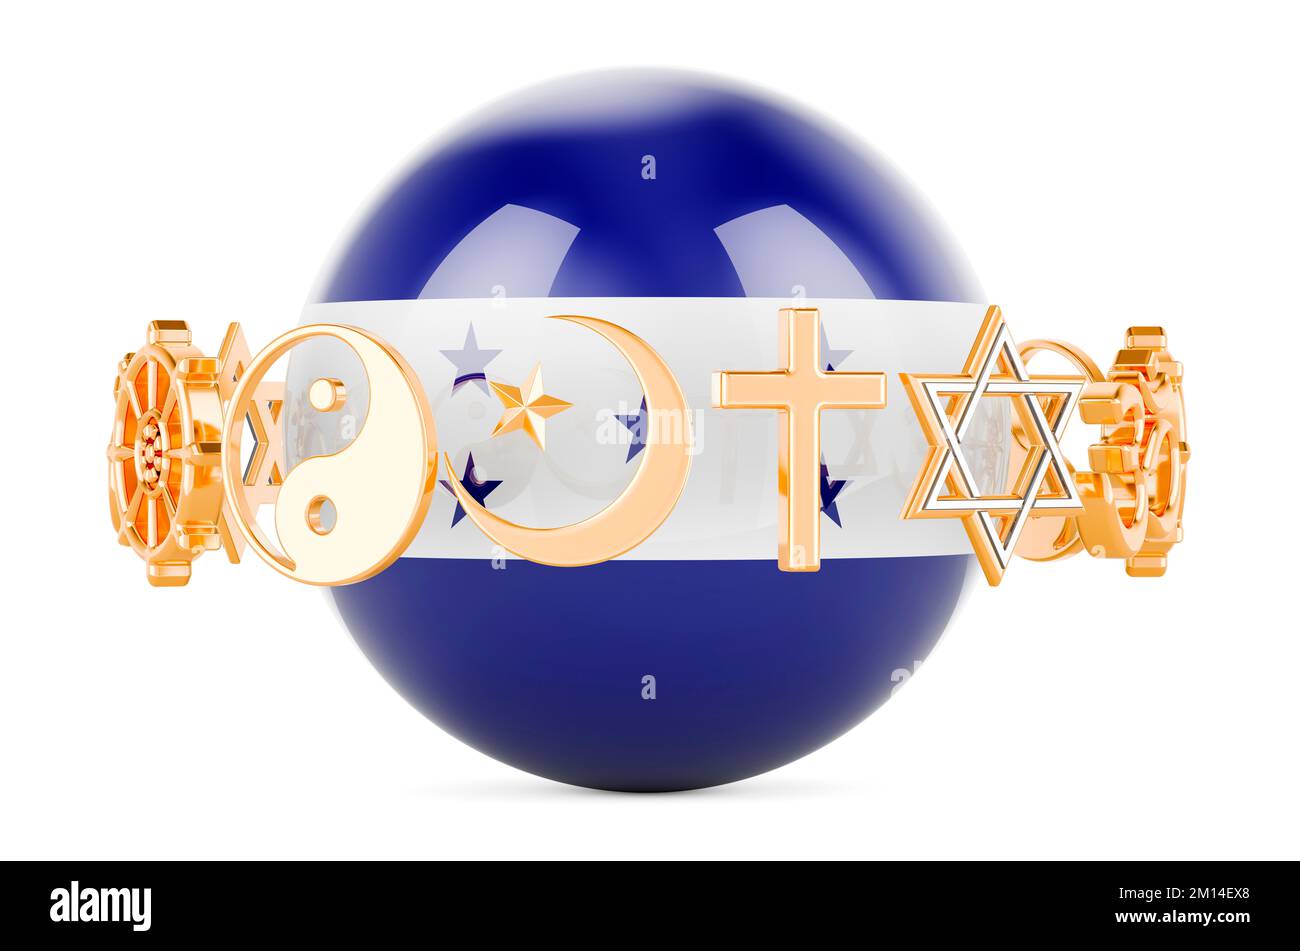 Honduranian flag painted on sphere with religions symbols around, 3D rendering isolated on white background Stock Photo